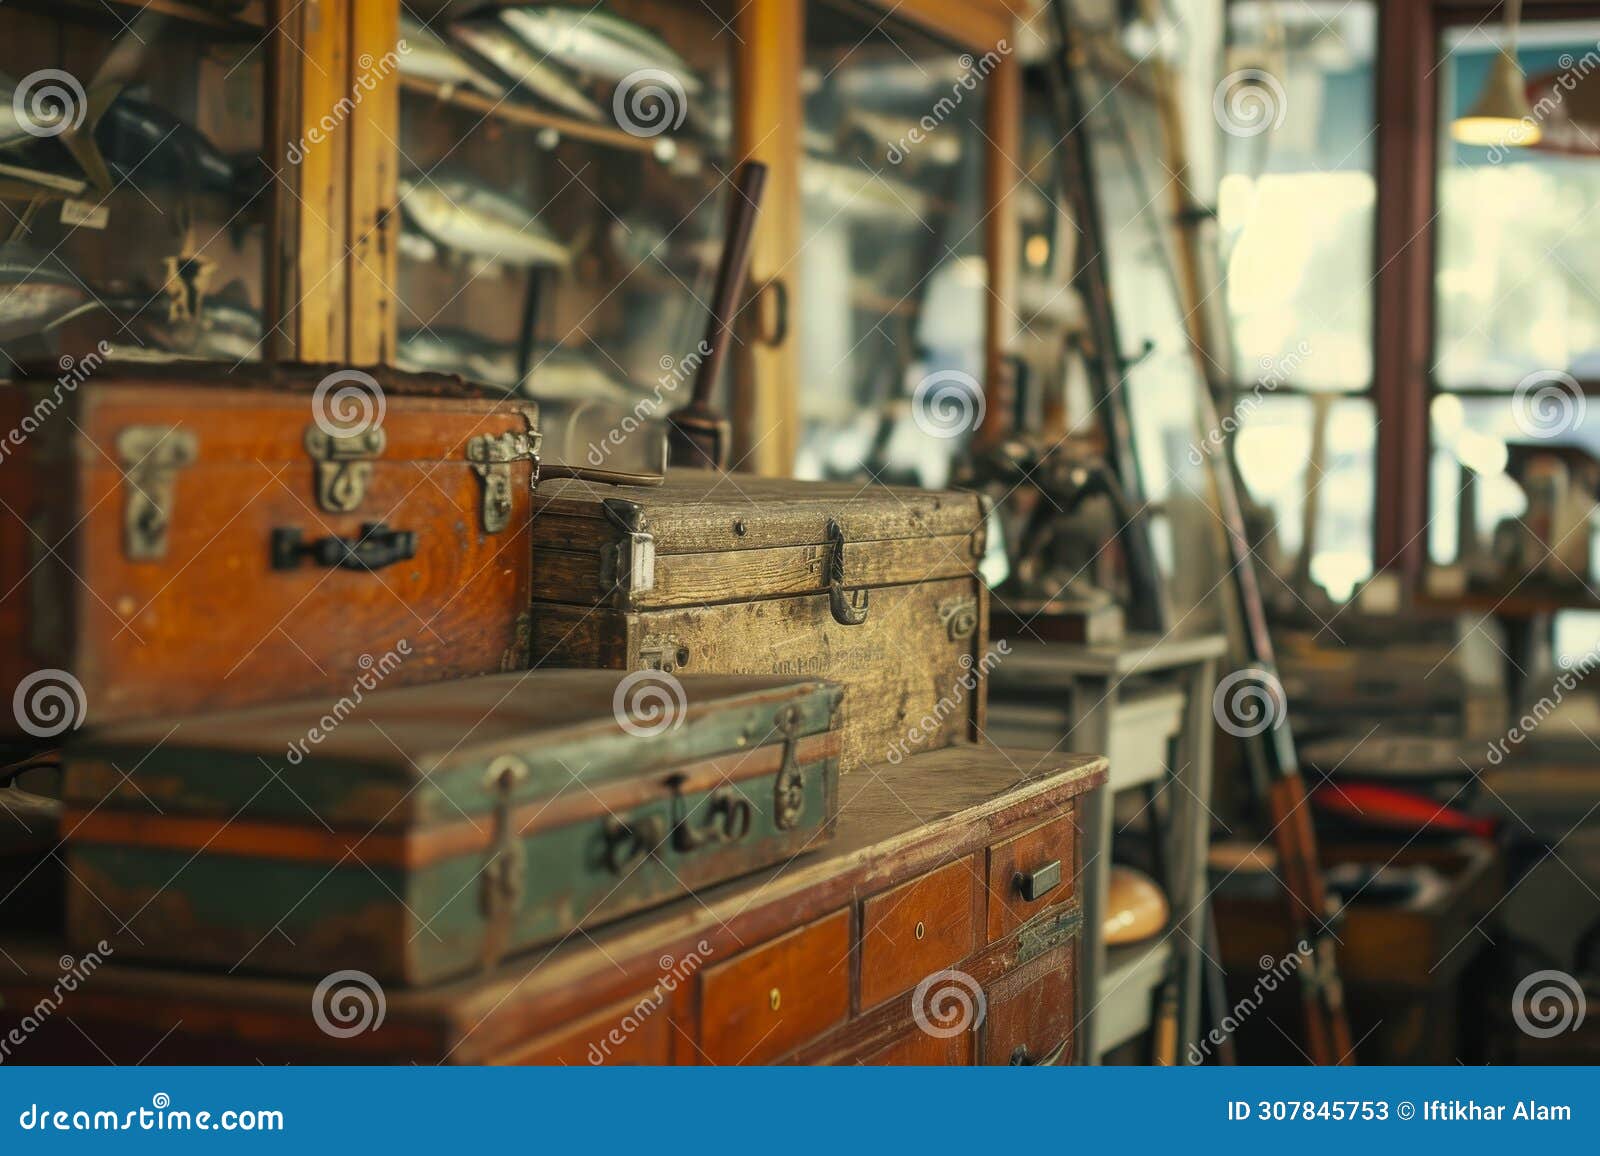 A Room Filled with Numerous Old Suitcases, an Antique Shop